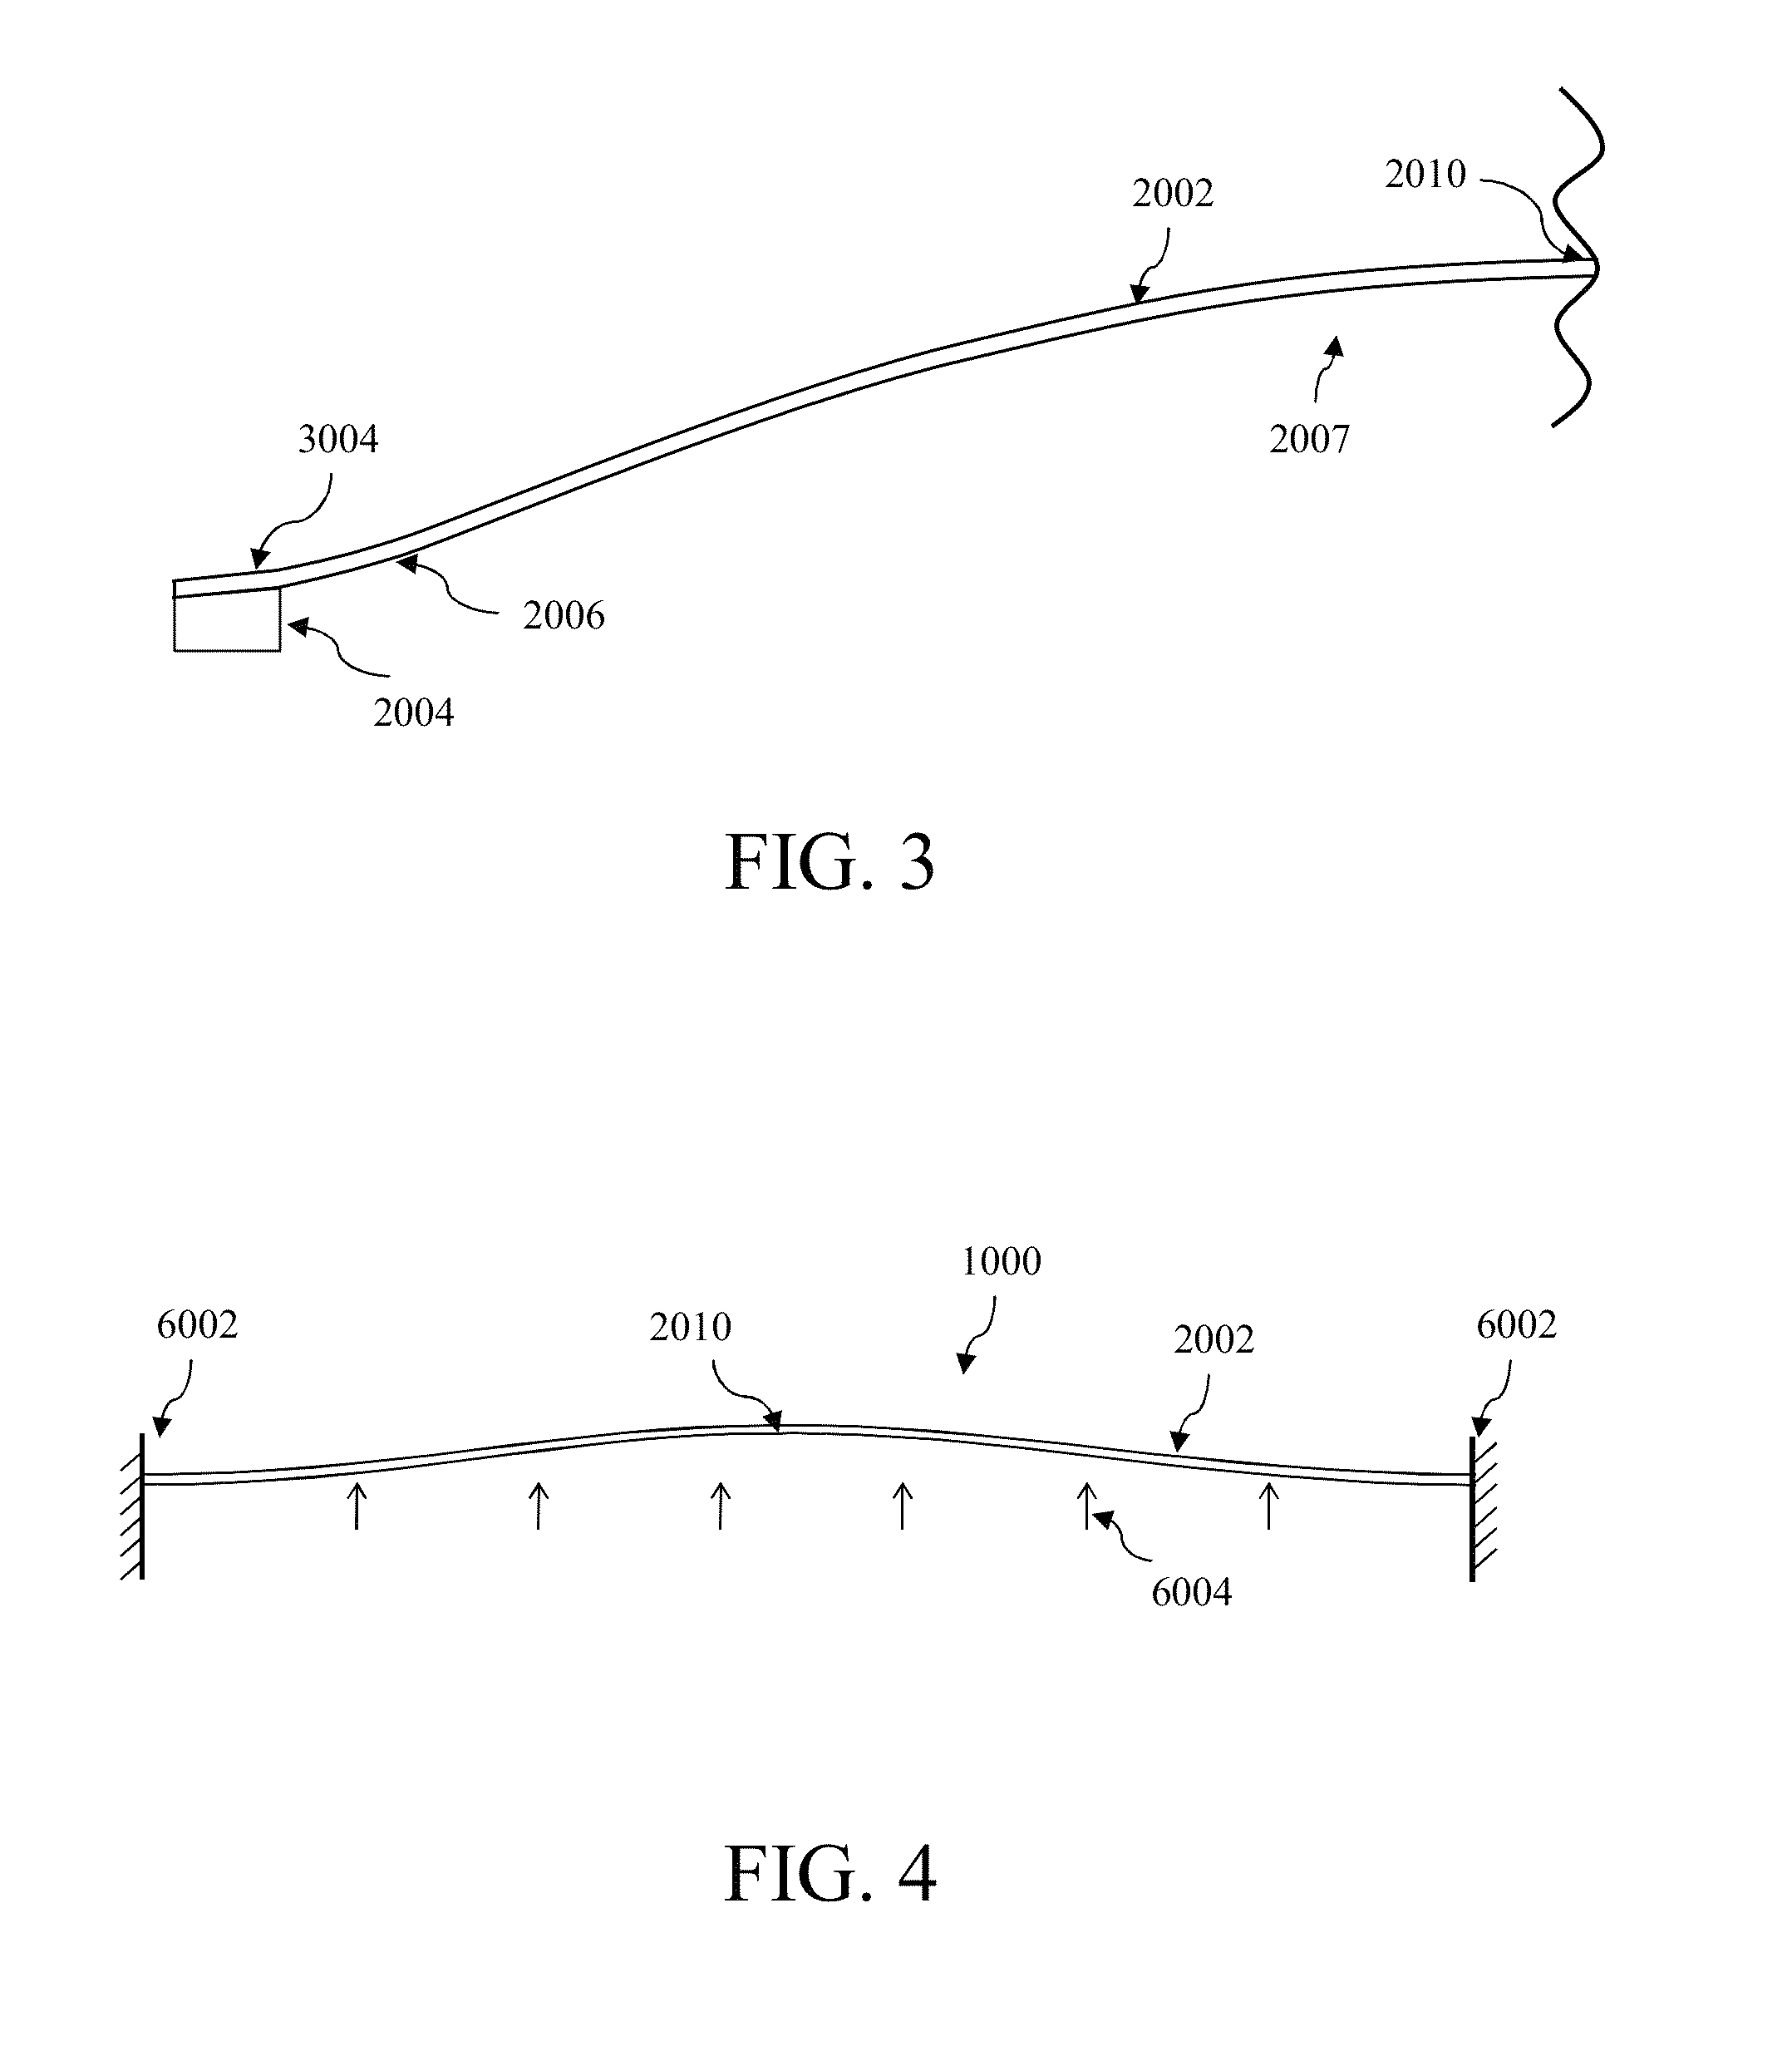 Adaptive optical devices with controllable focal power and aspheric shape